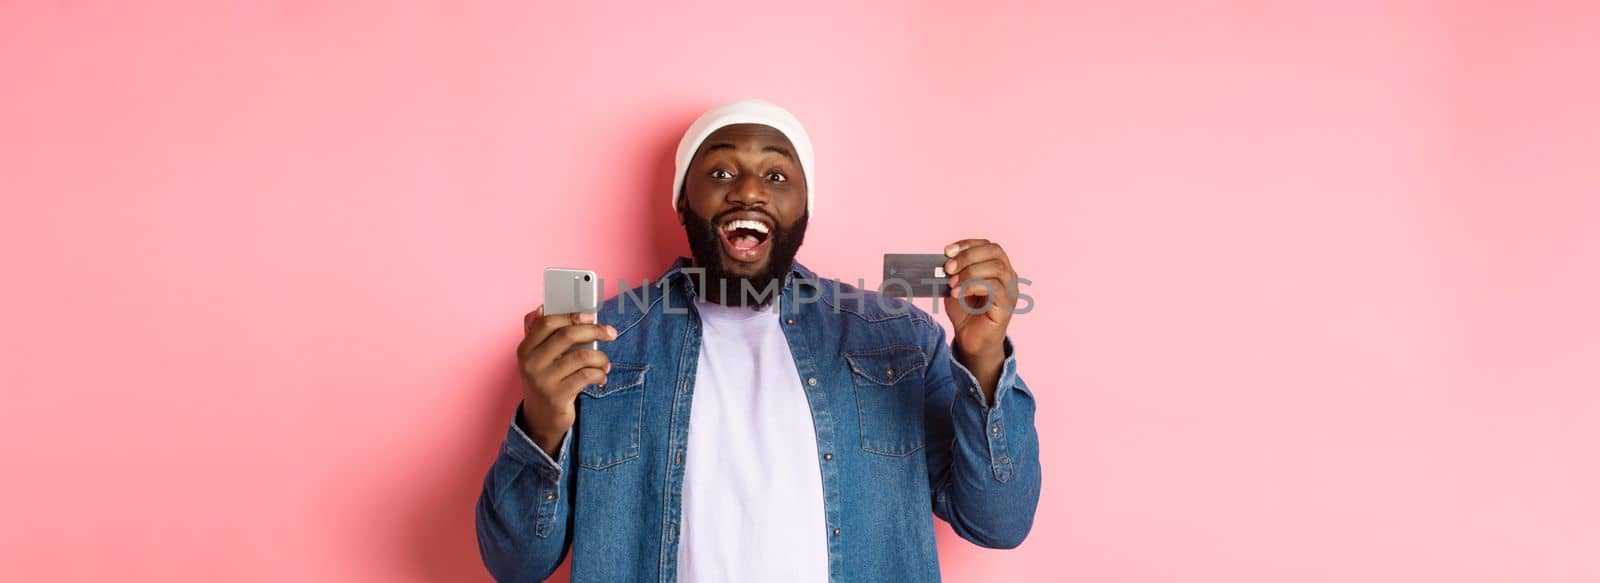 Online shopping. Happy bearded african-american man smiling, showing credit card and making purchase on smartphone, standing over pink background.